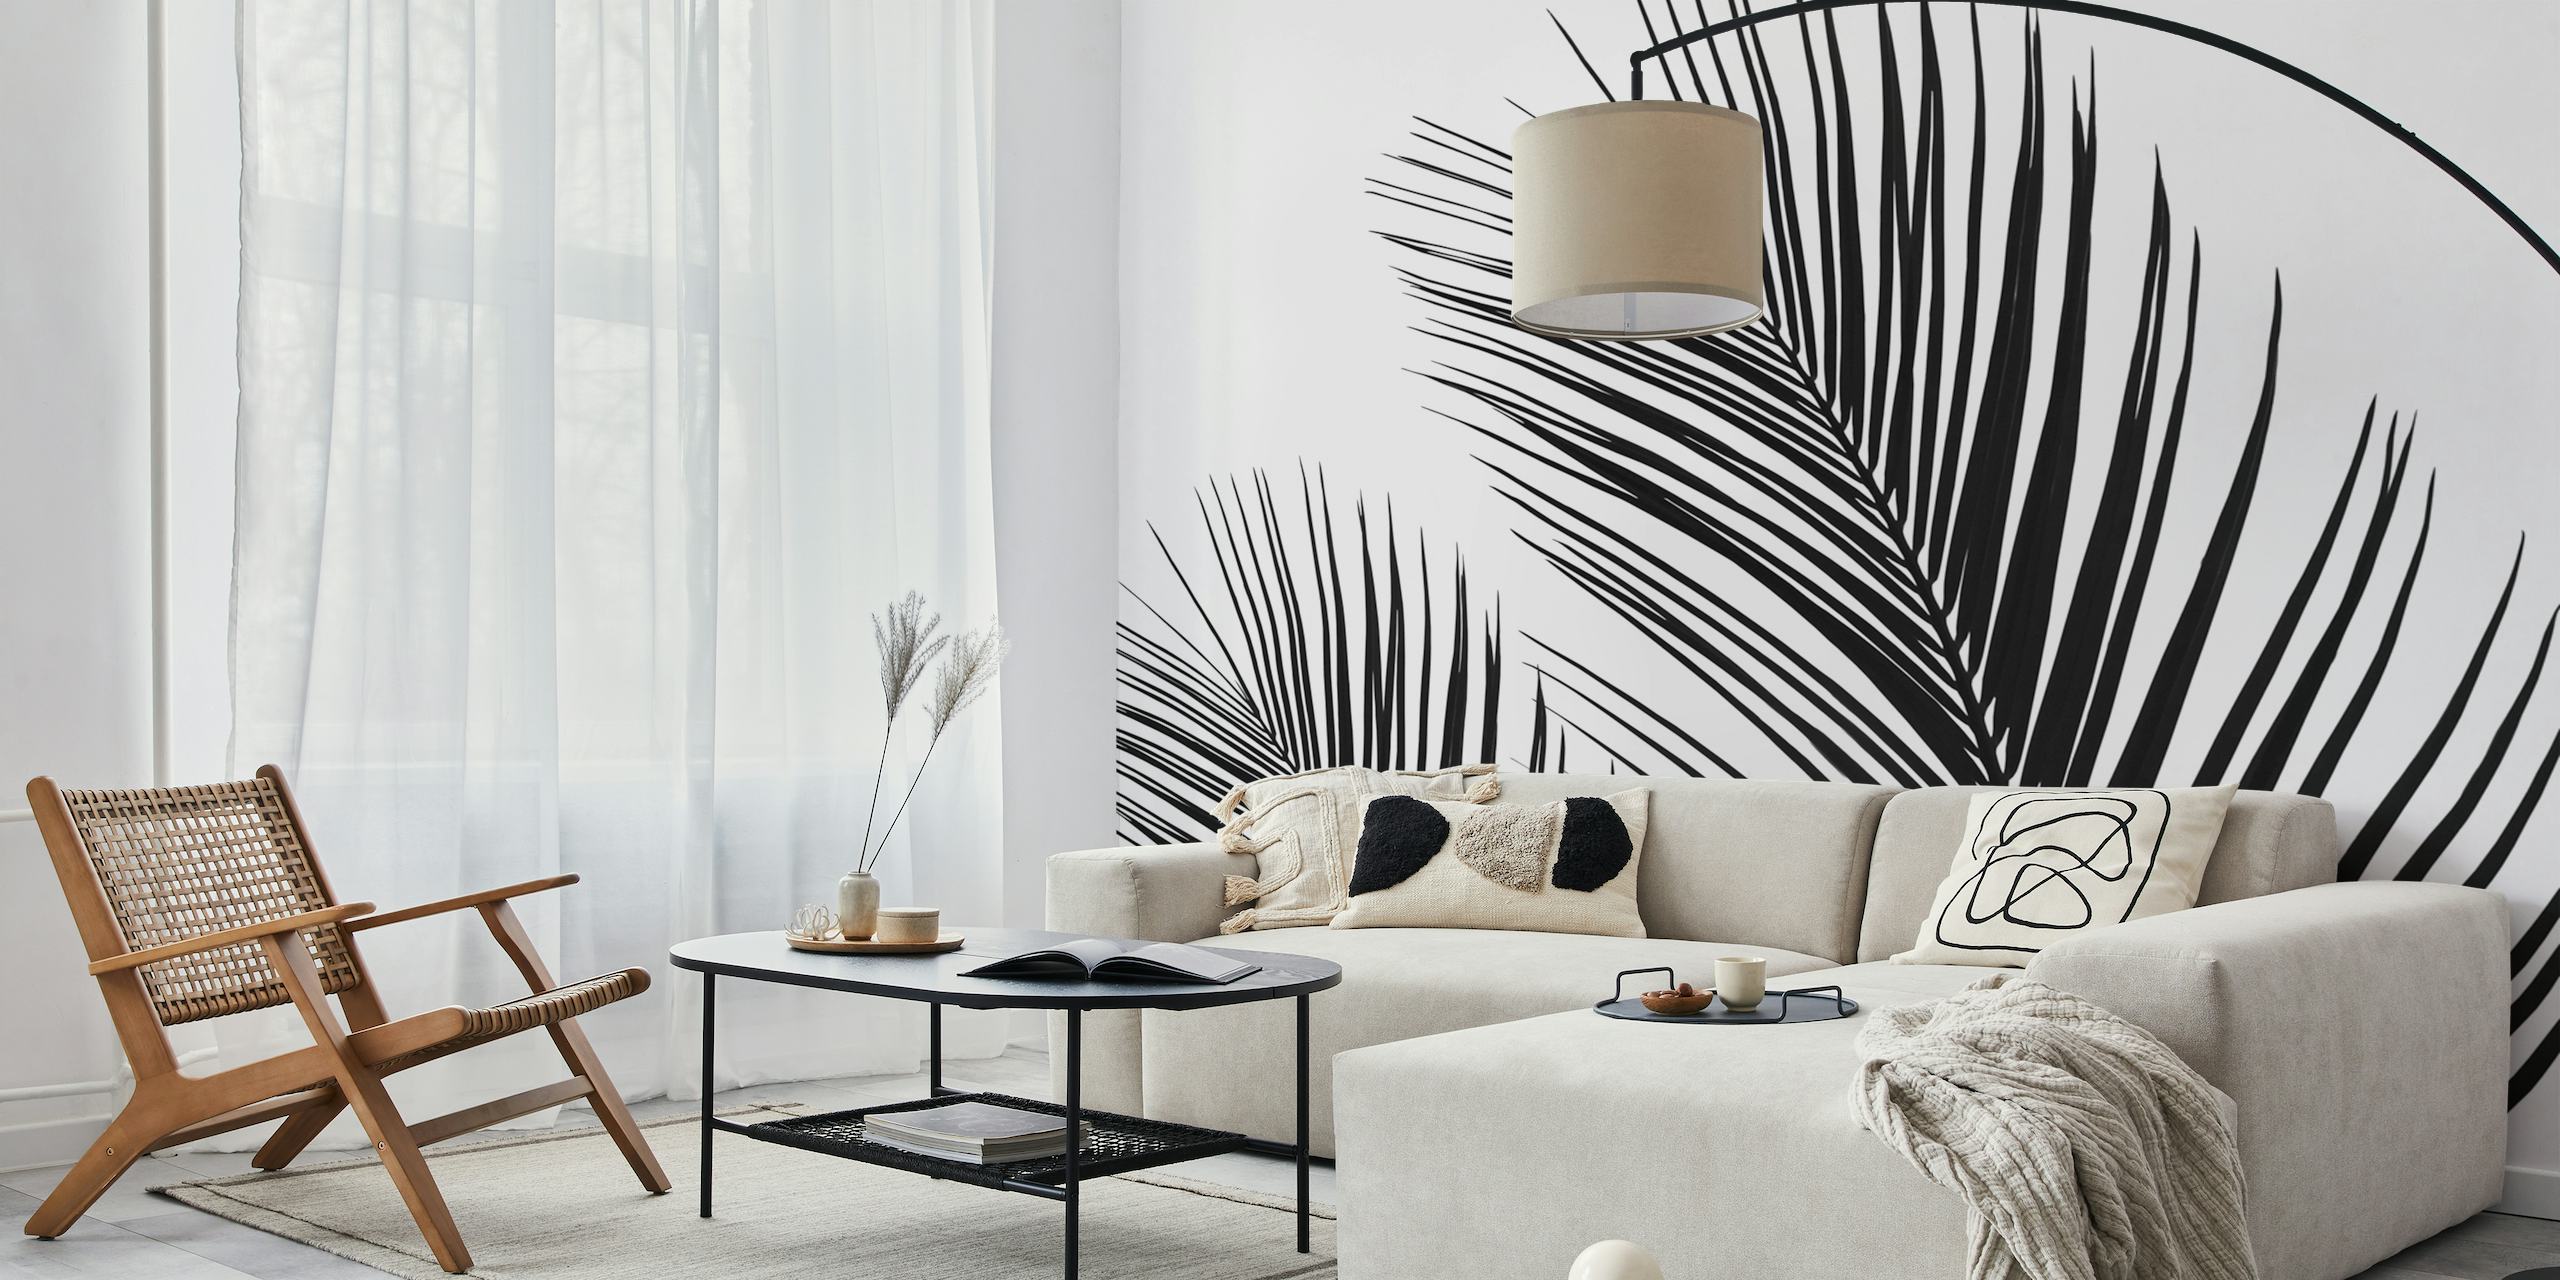 Monochrome wall mural featuring a close-up view of tropical palm leaves with intricate details and textures.